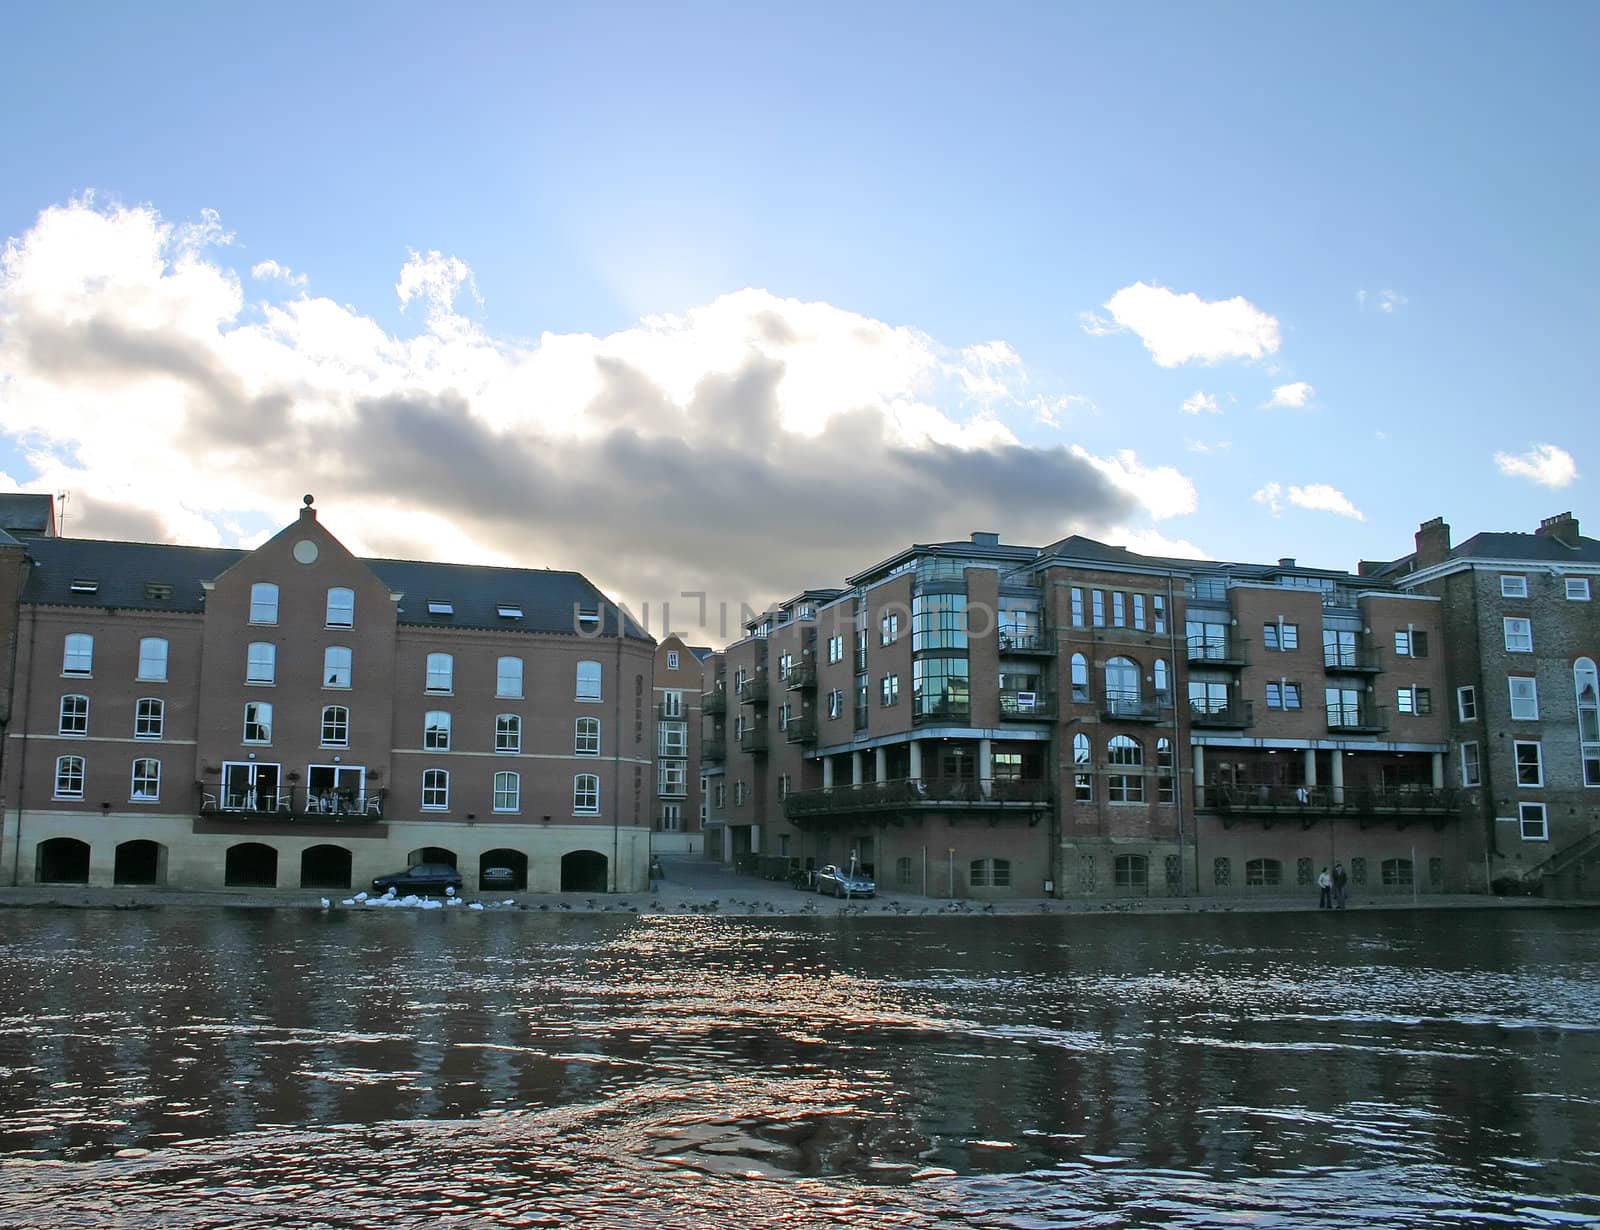 Modern Apartments on the River Ouse in York by green308